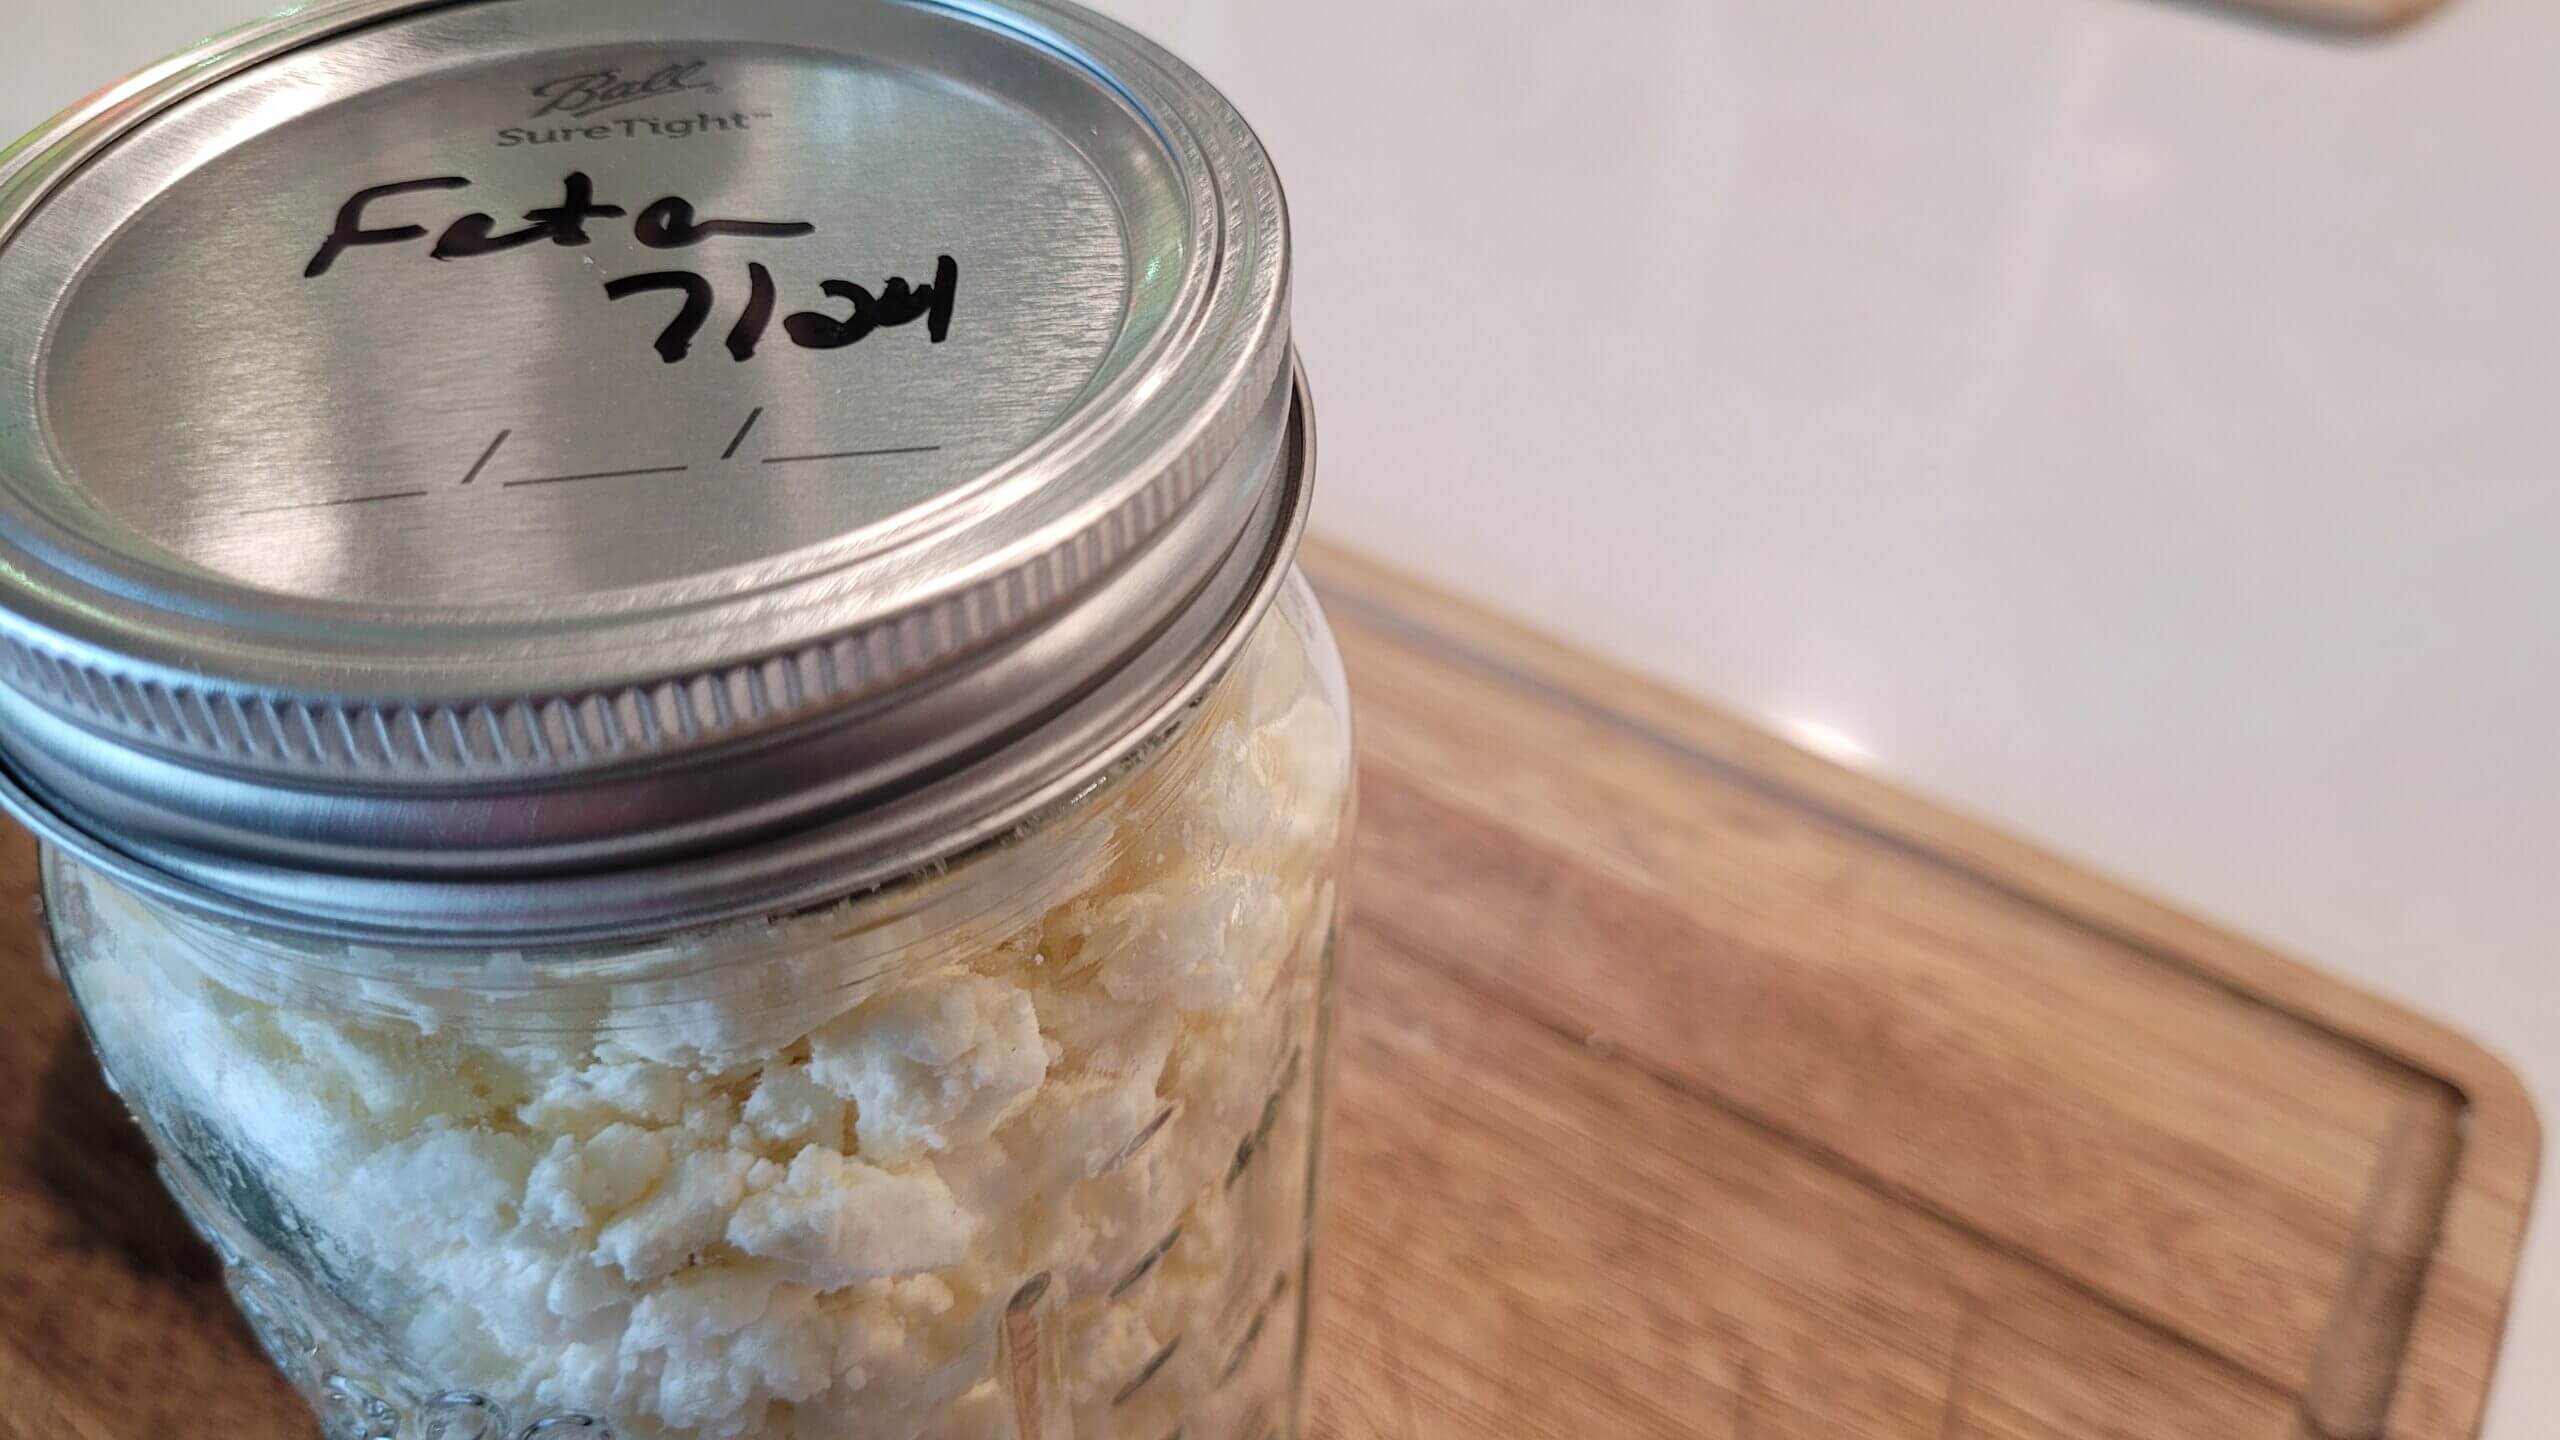 Glass jar with feta cheese inside of it with a metal lid 